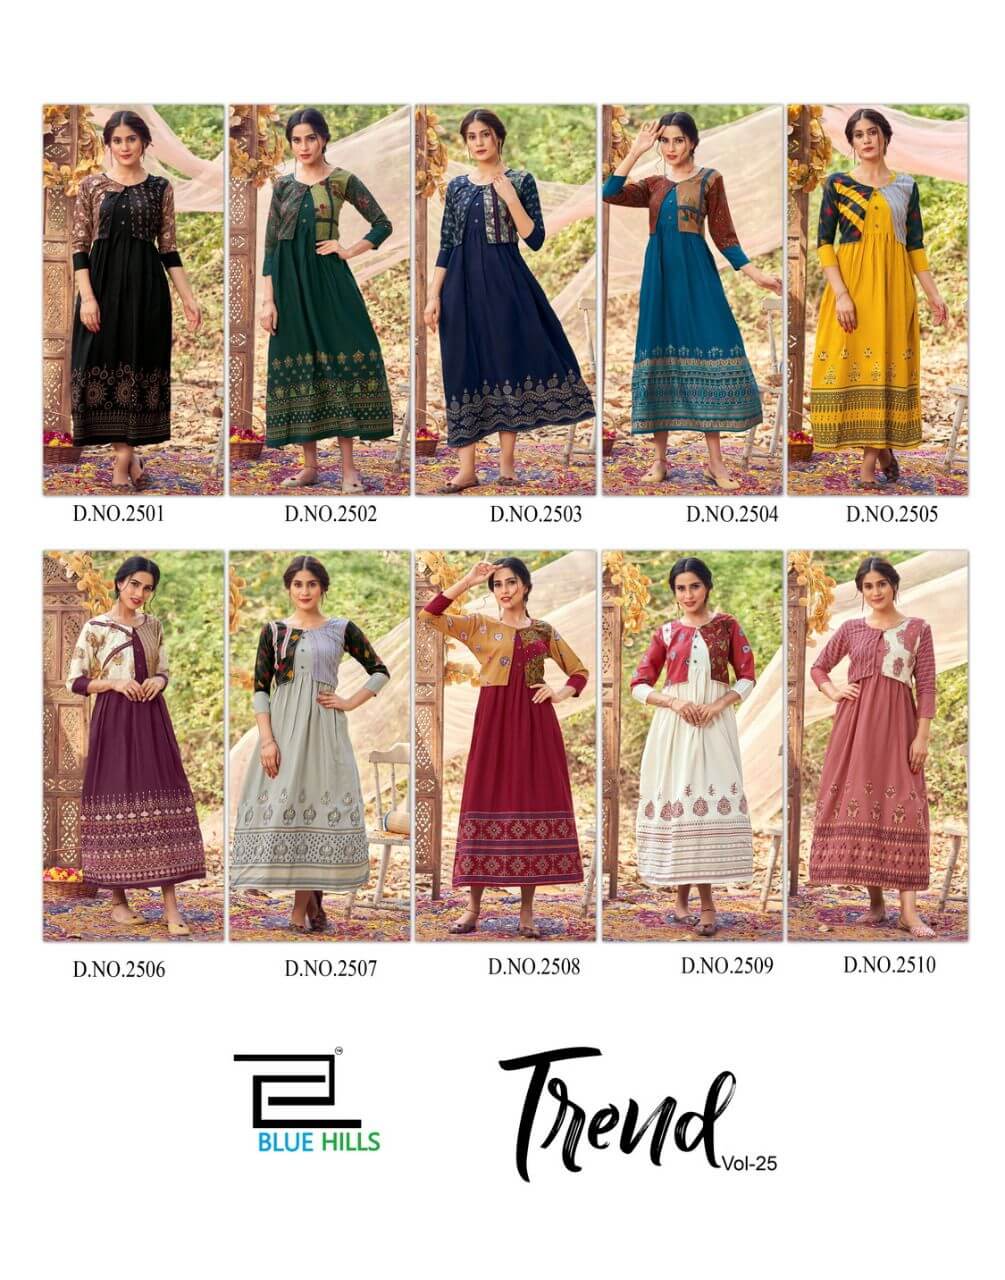 Blue Hills Trend Vol 25 collection 2